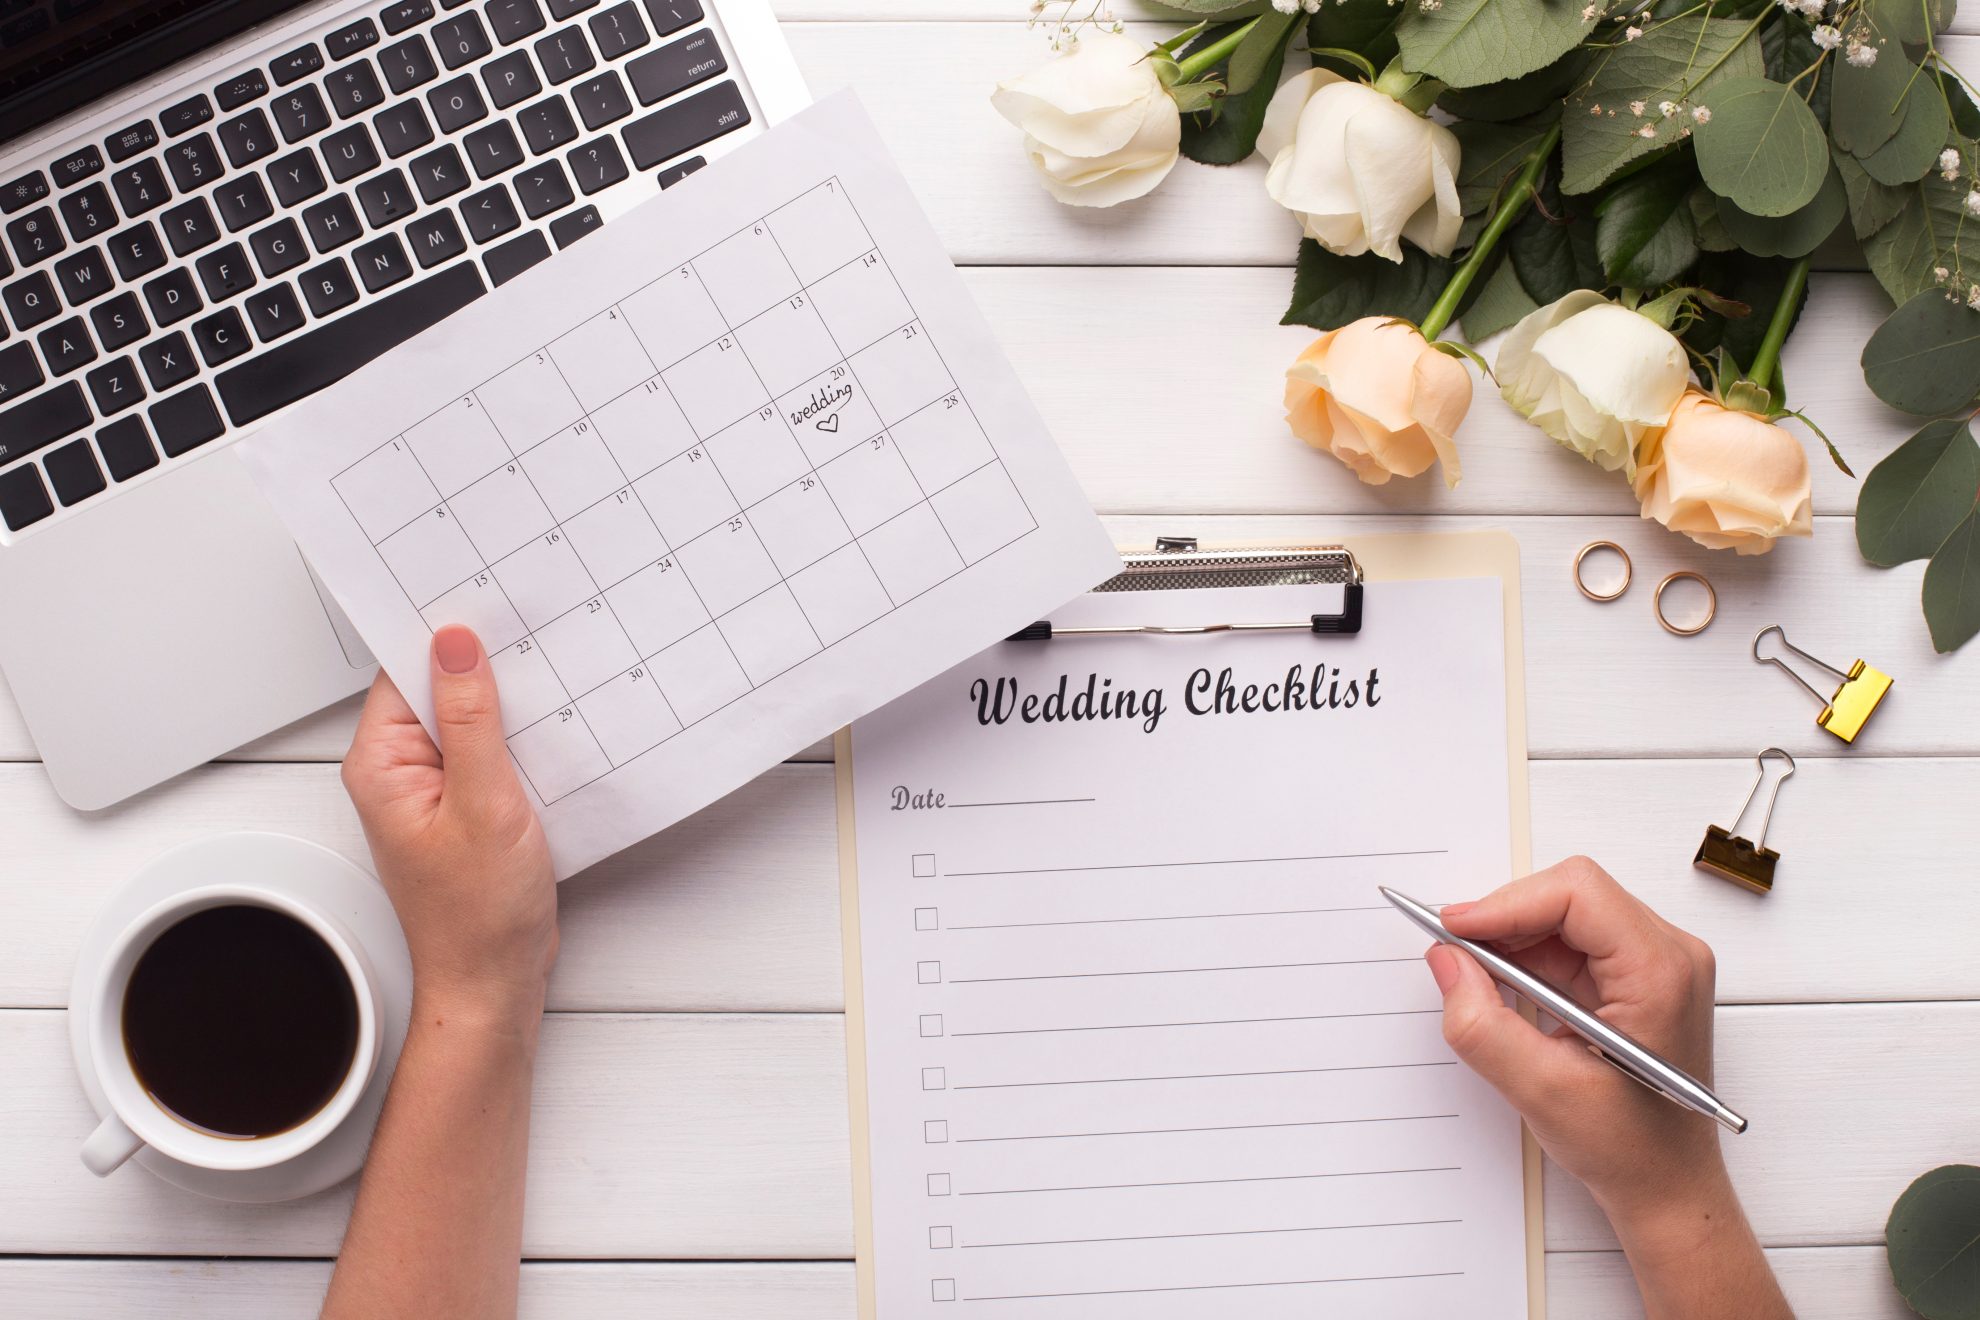 21 Things a bride has to do when planning a wedding